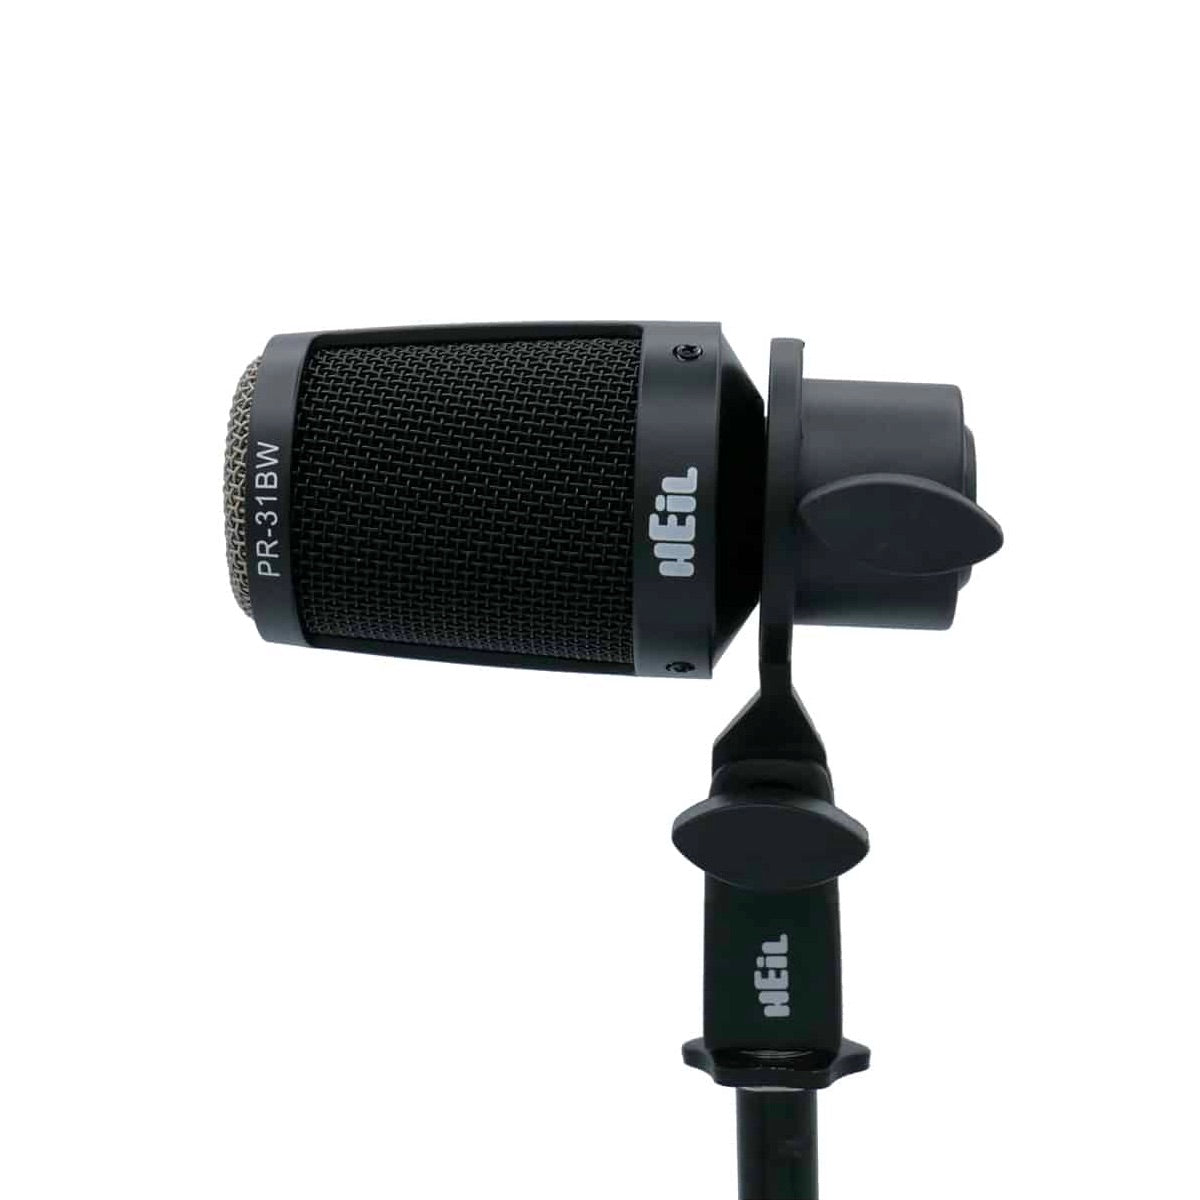 Heil PR 31 BW Large Diaphragm Dynamic Microphone, mounted on a mic stand, side view